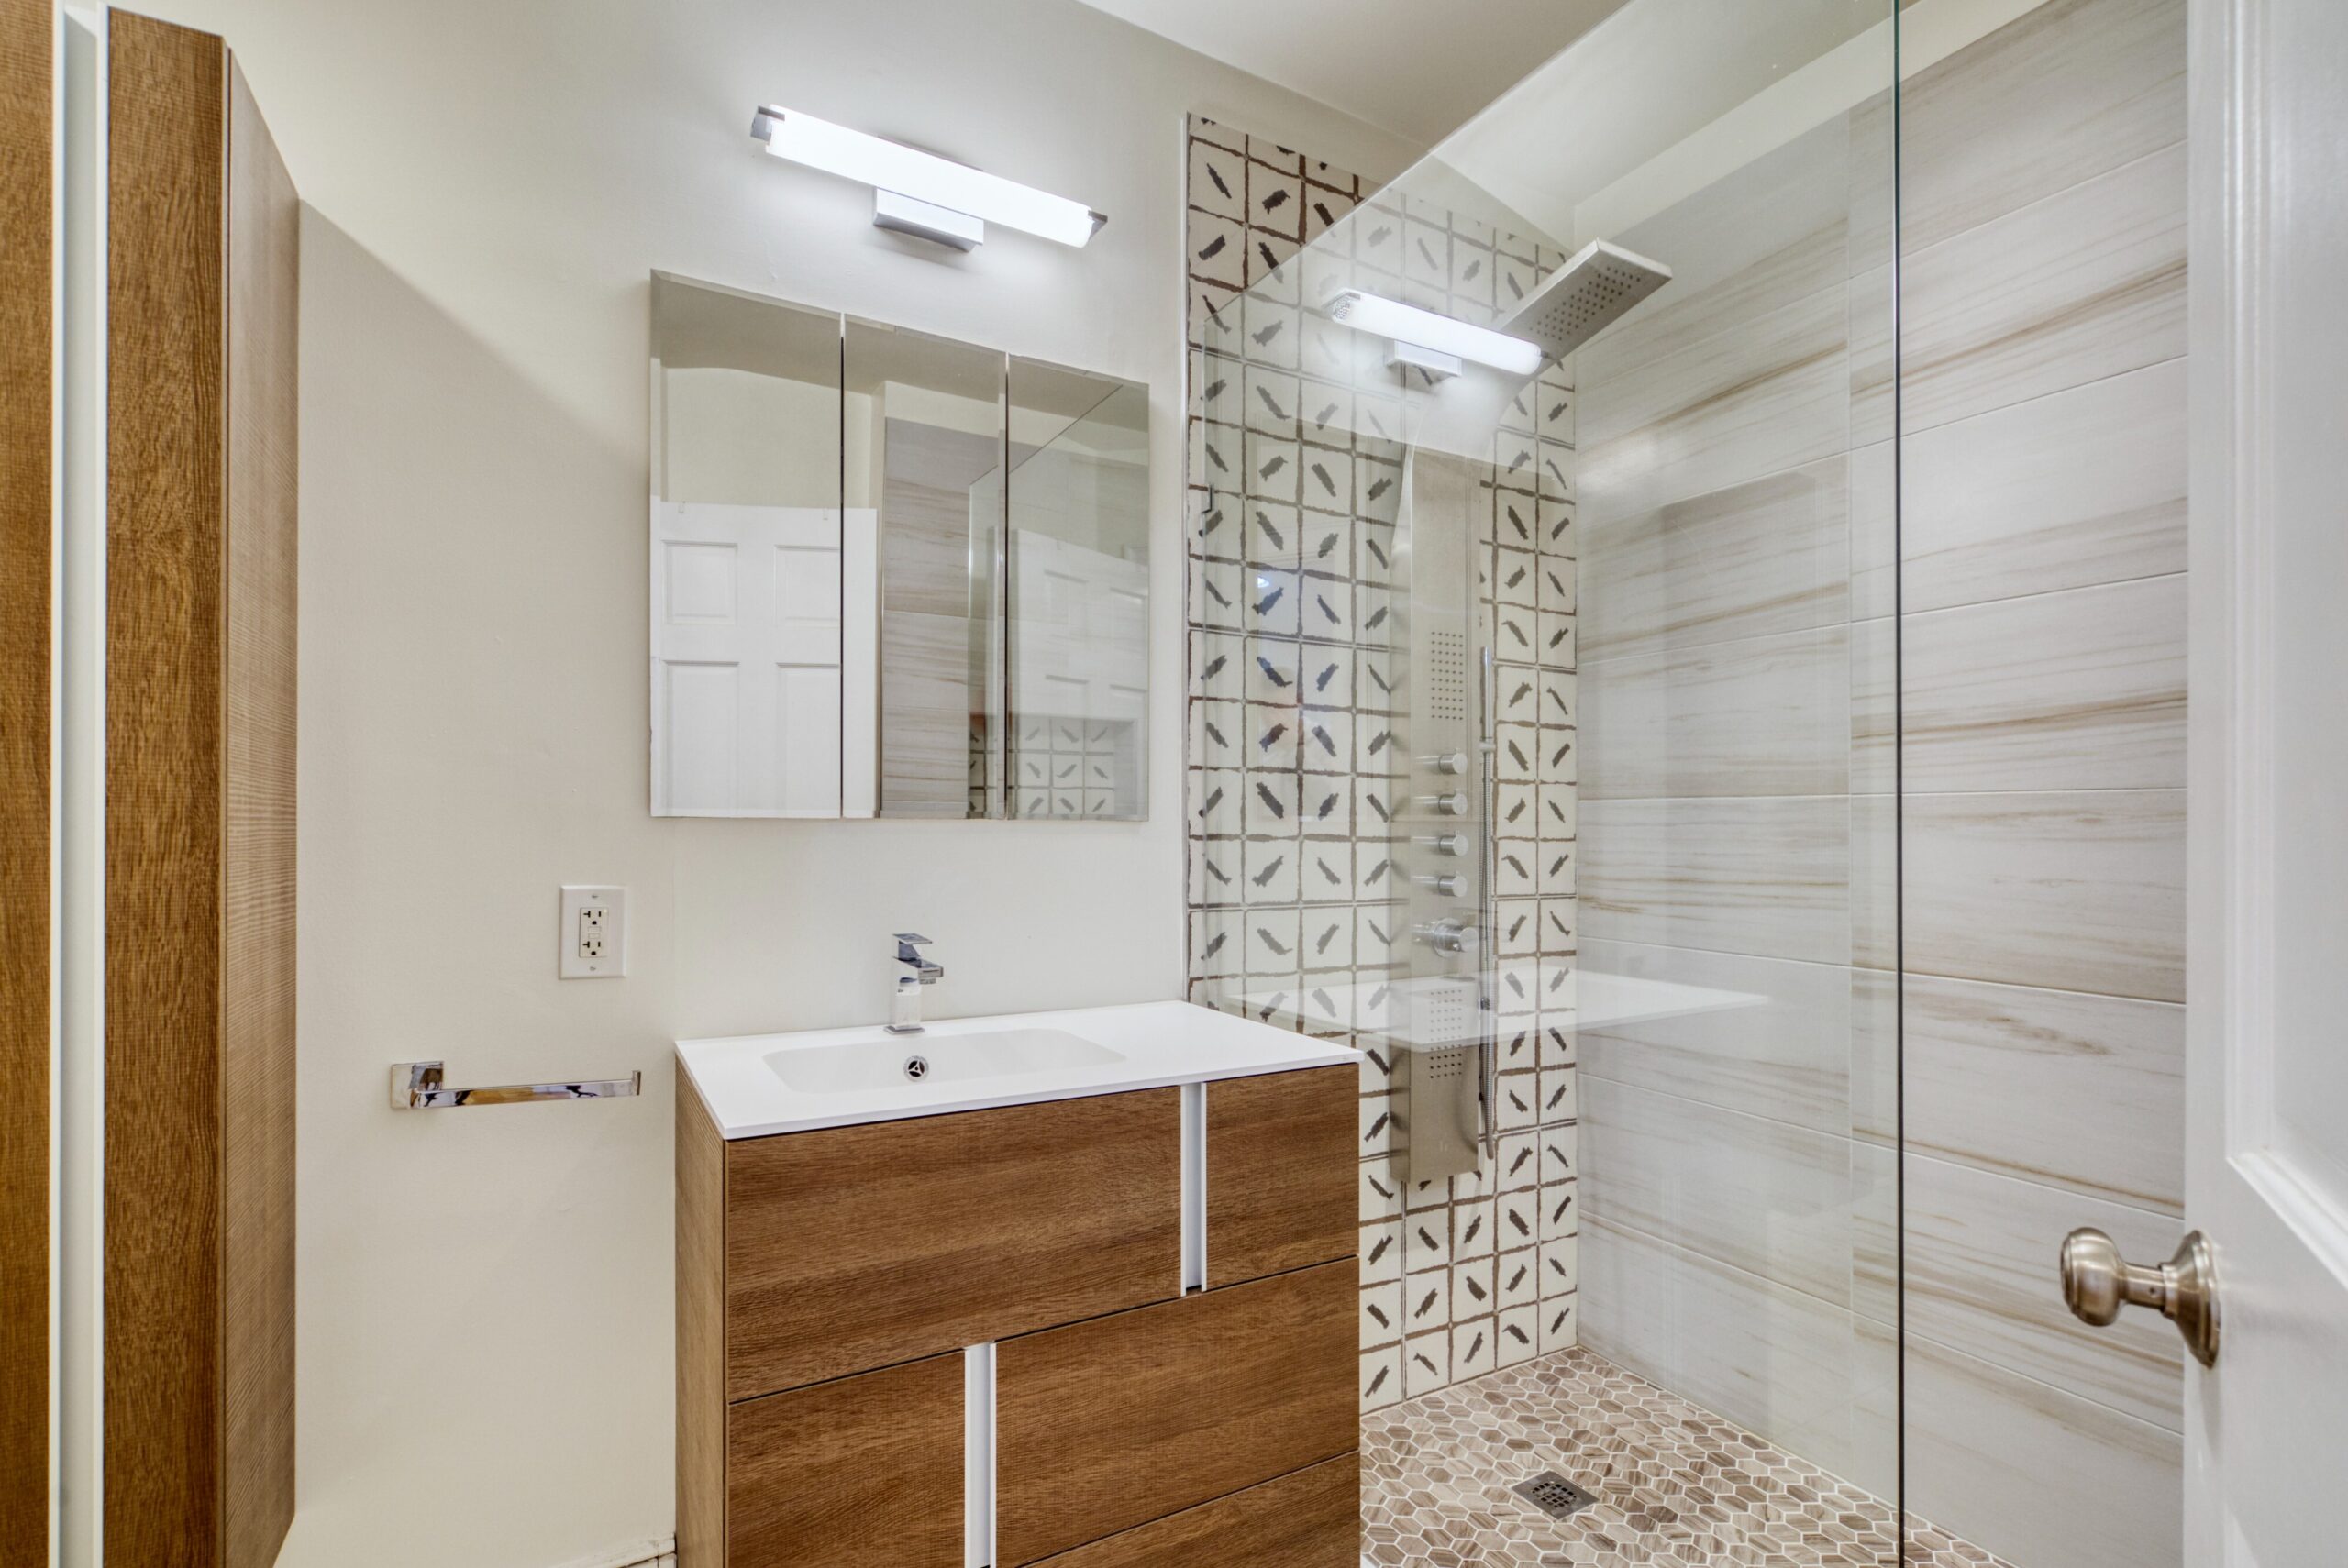 Interior professional photo of 1826 Varnum St NW - showing bathroom with interesting tilework in the shower